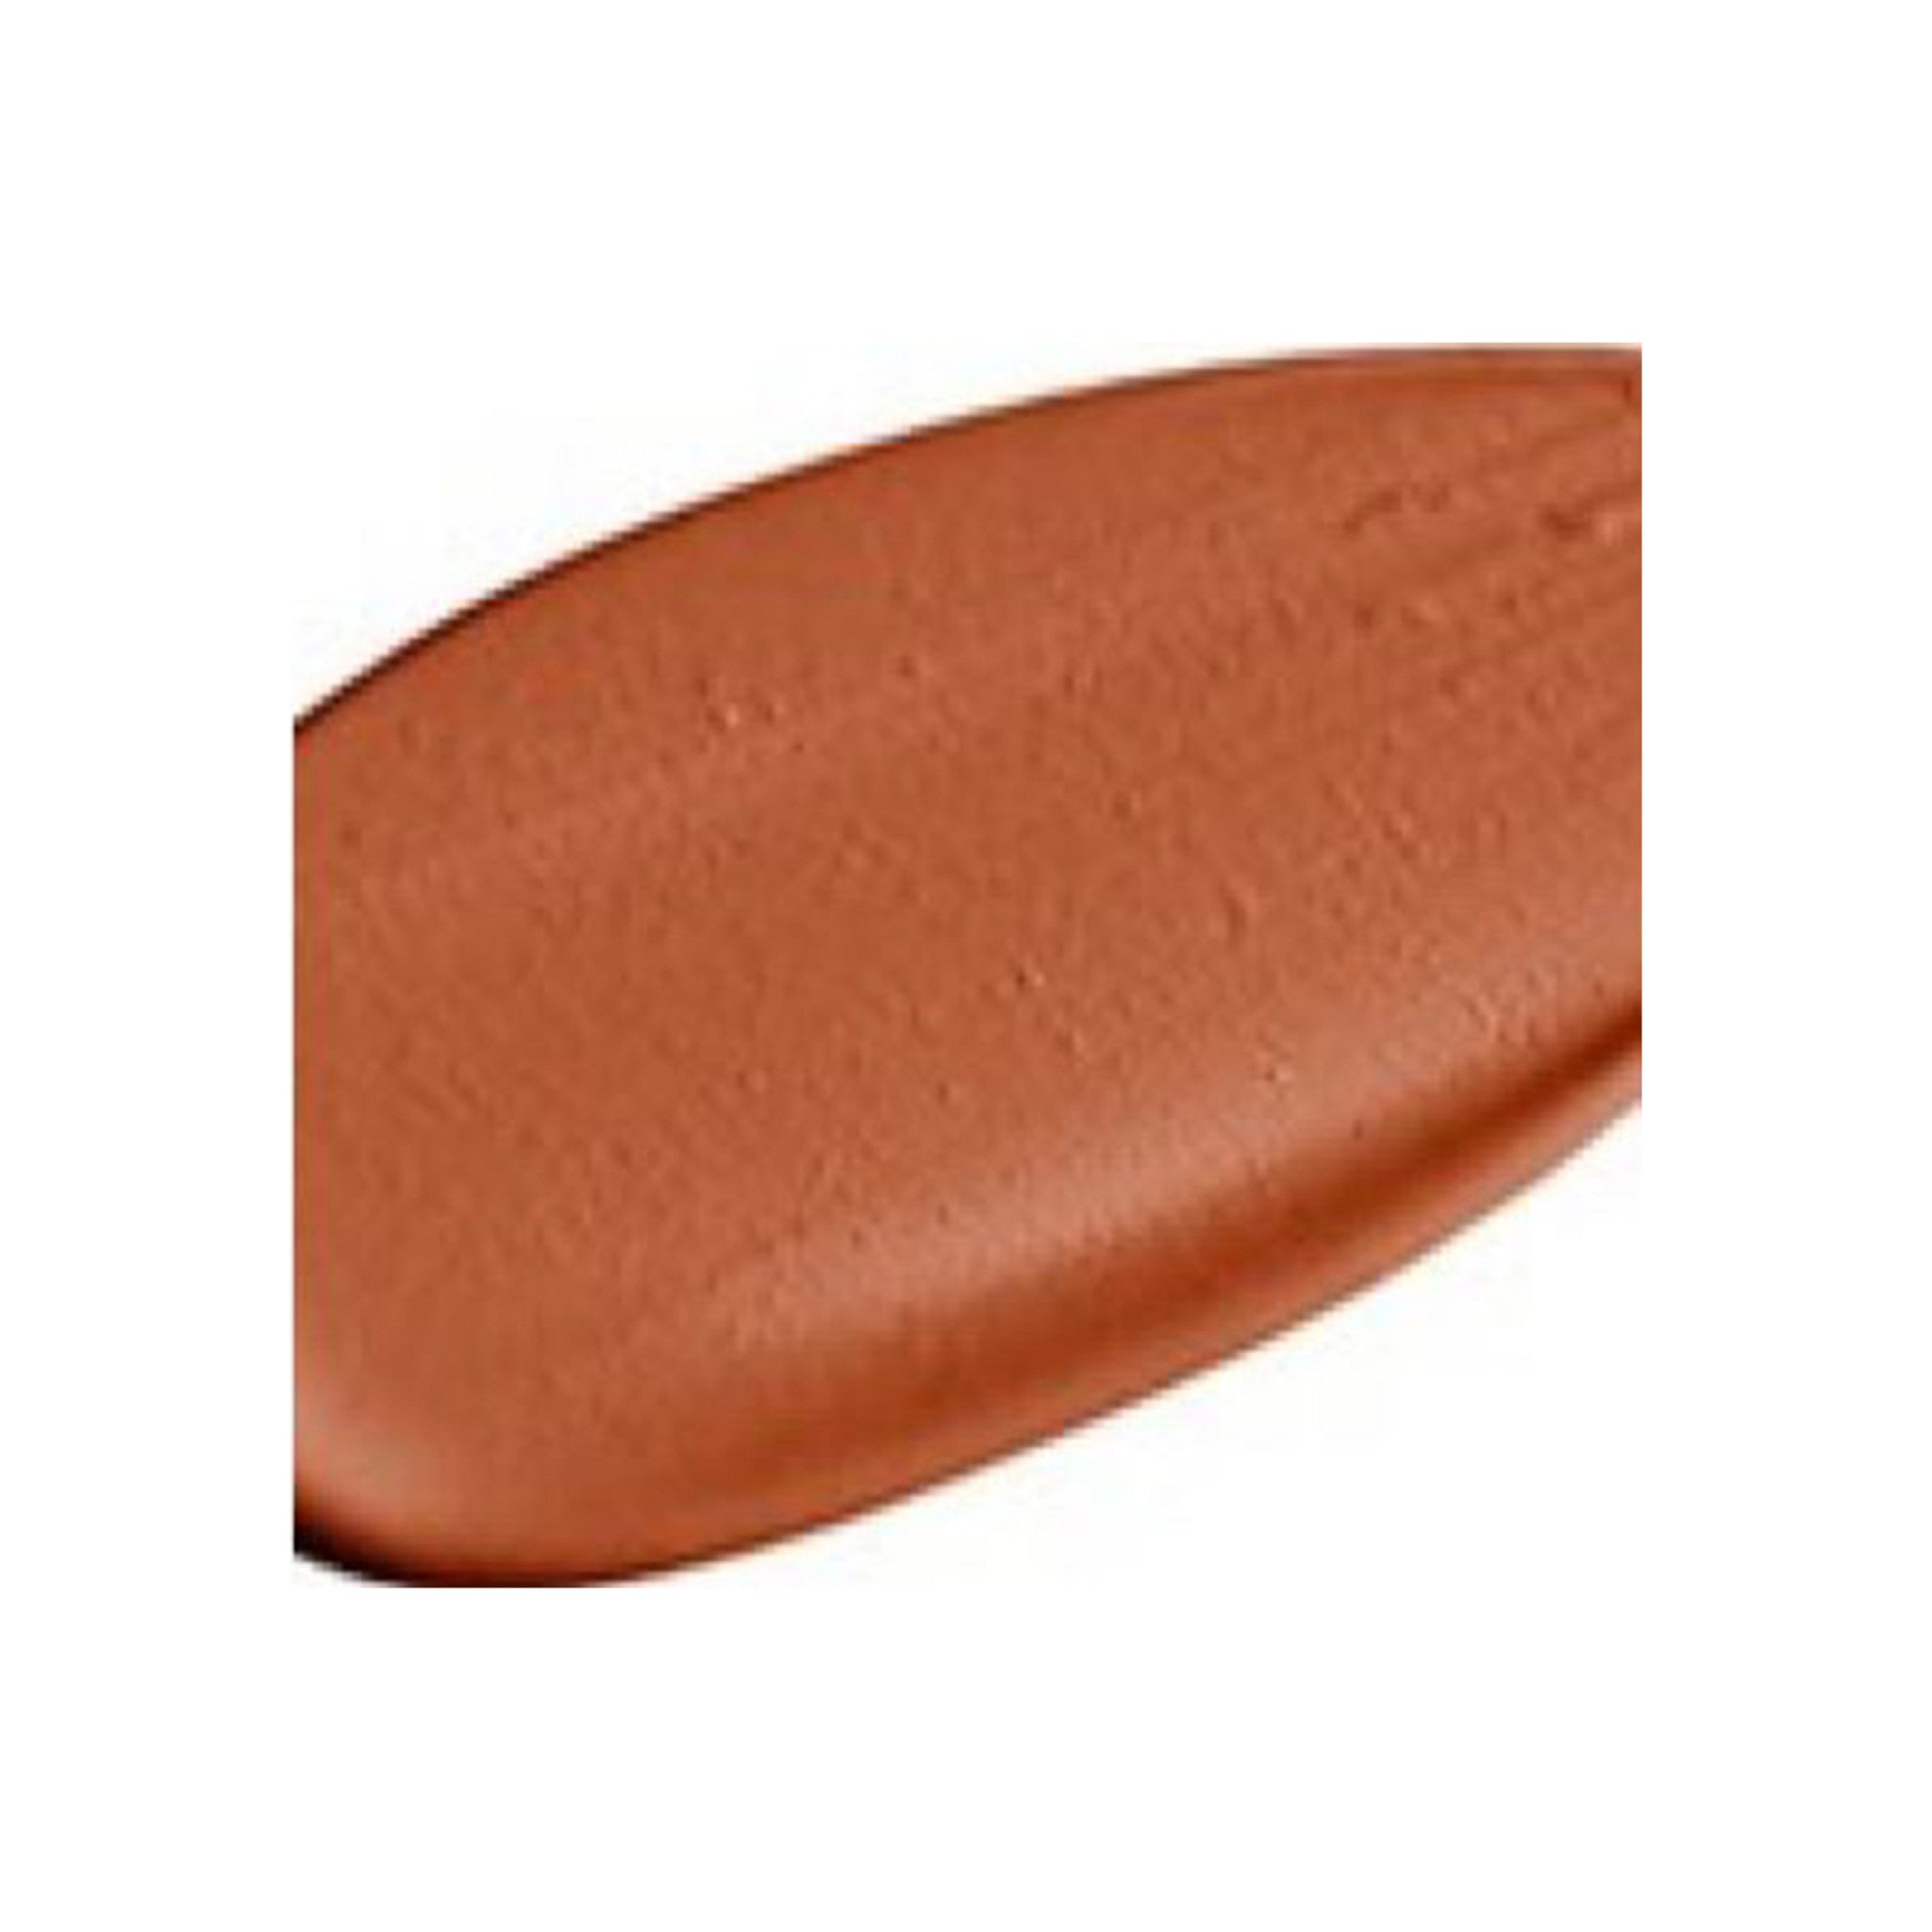 Clinique Even Better Makeup Broad Spectrum SPF 15 Color/Shade variant: PECAN main image.